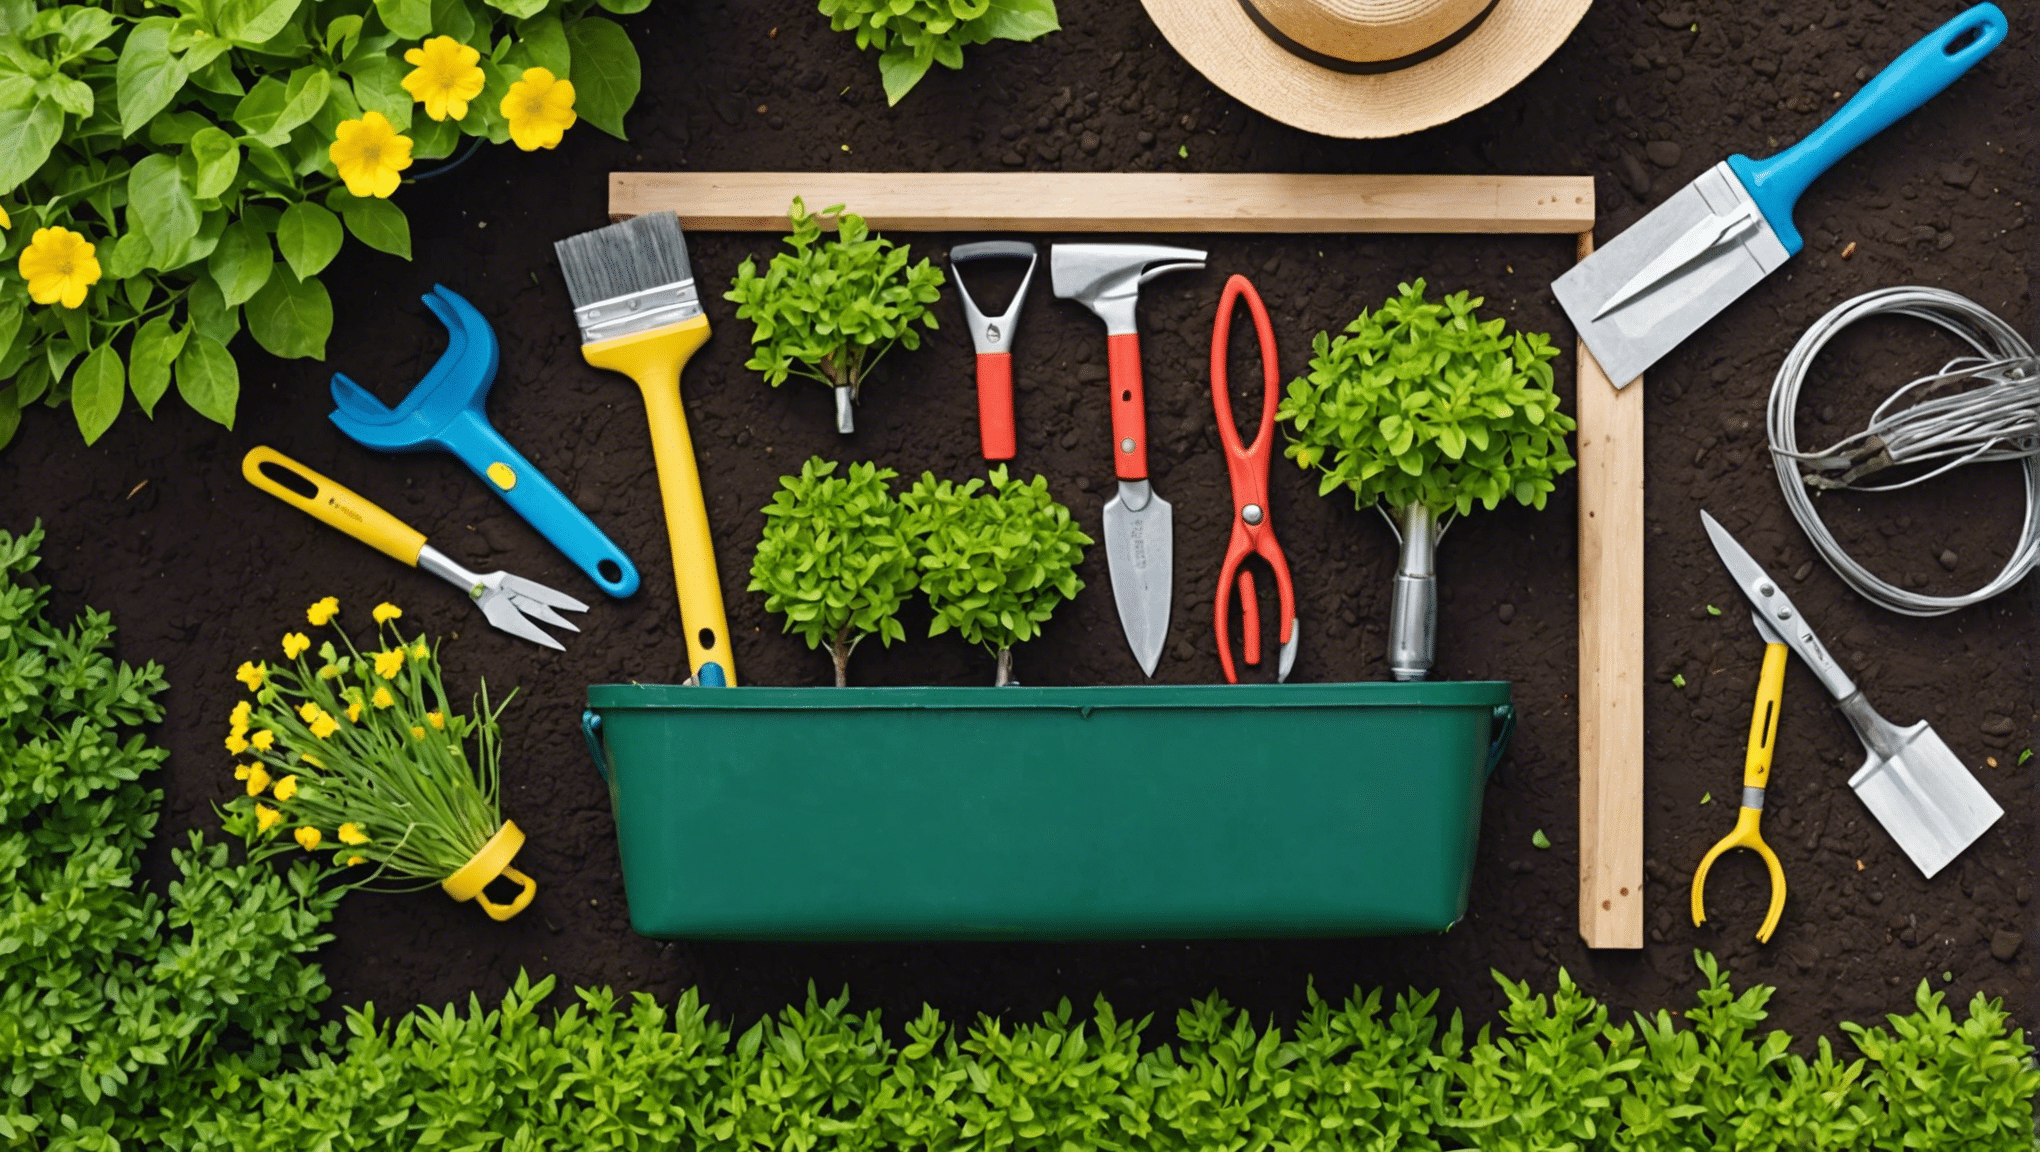 discover the must-have items to pack in your gardening tool bag and make your gardening experience more enjoyable and efficient. from pruning shears to gloves, find out what you need to have for a successful gardening session.